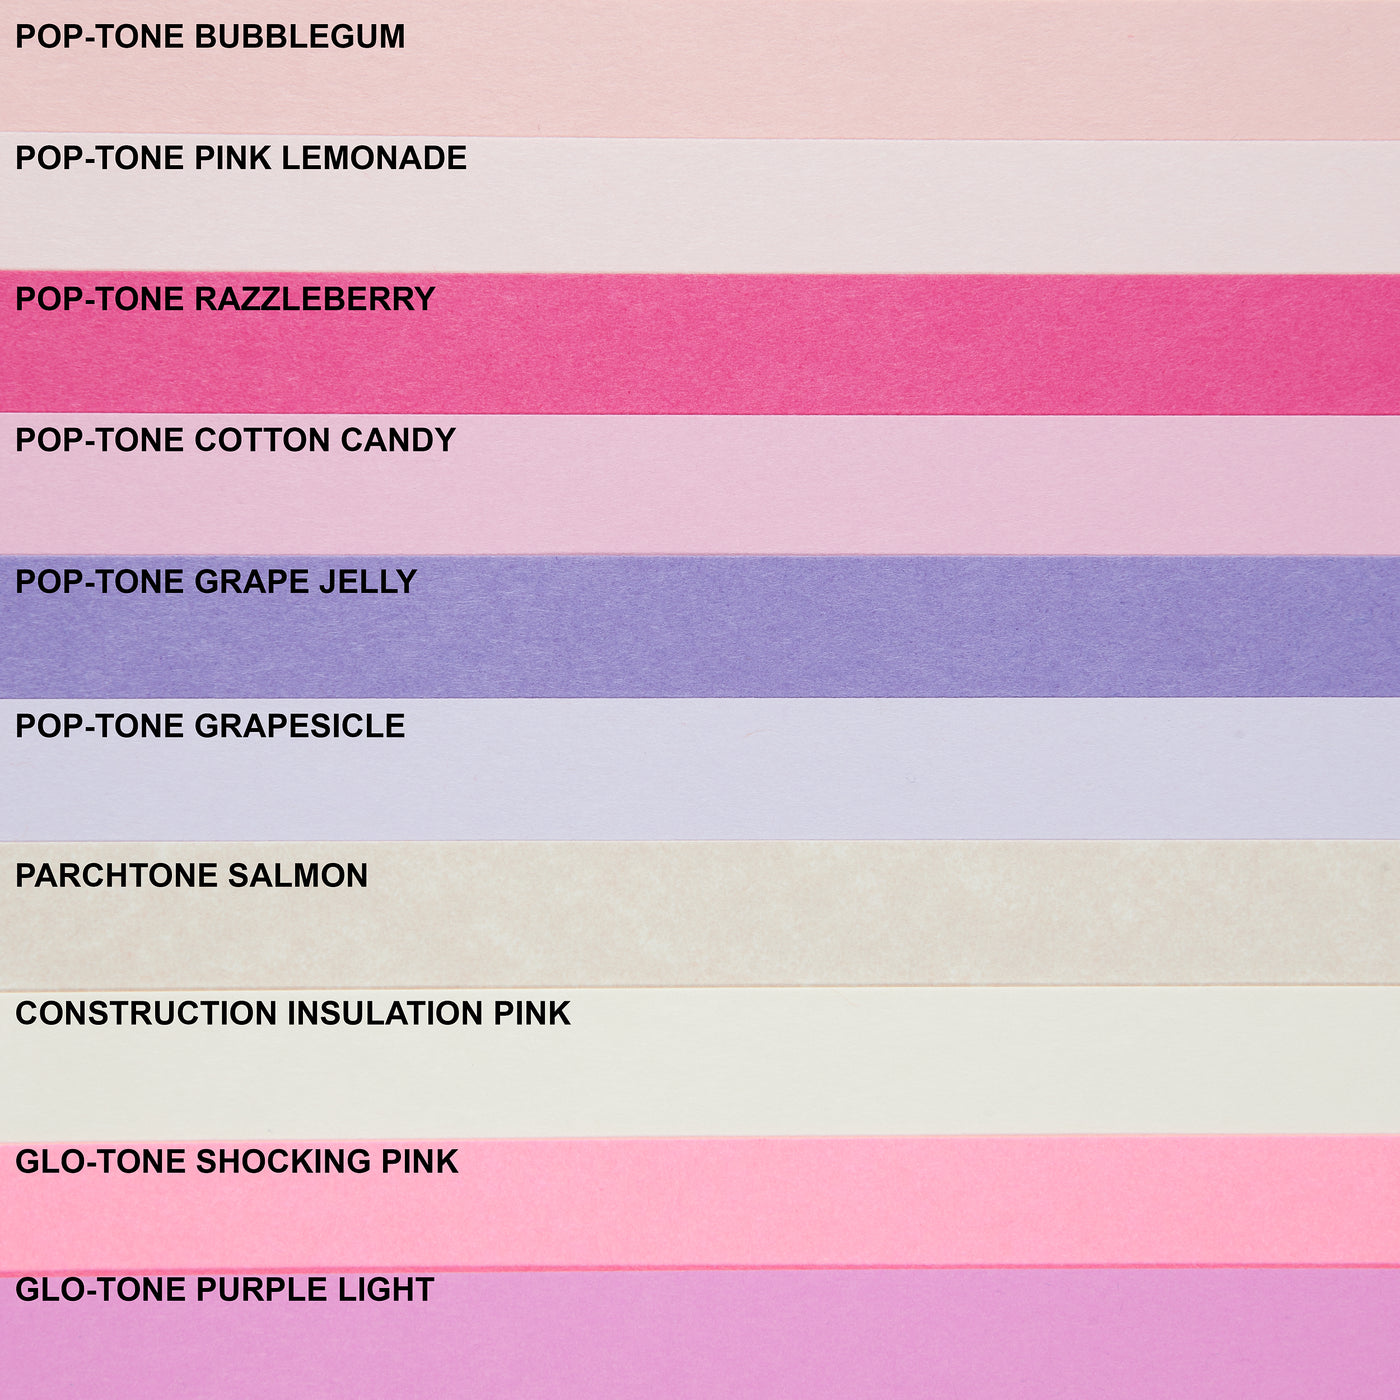 Insulation Pink Paper (Construction, Text Weight)